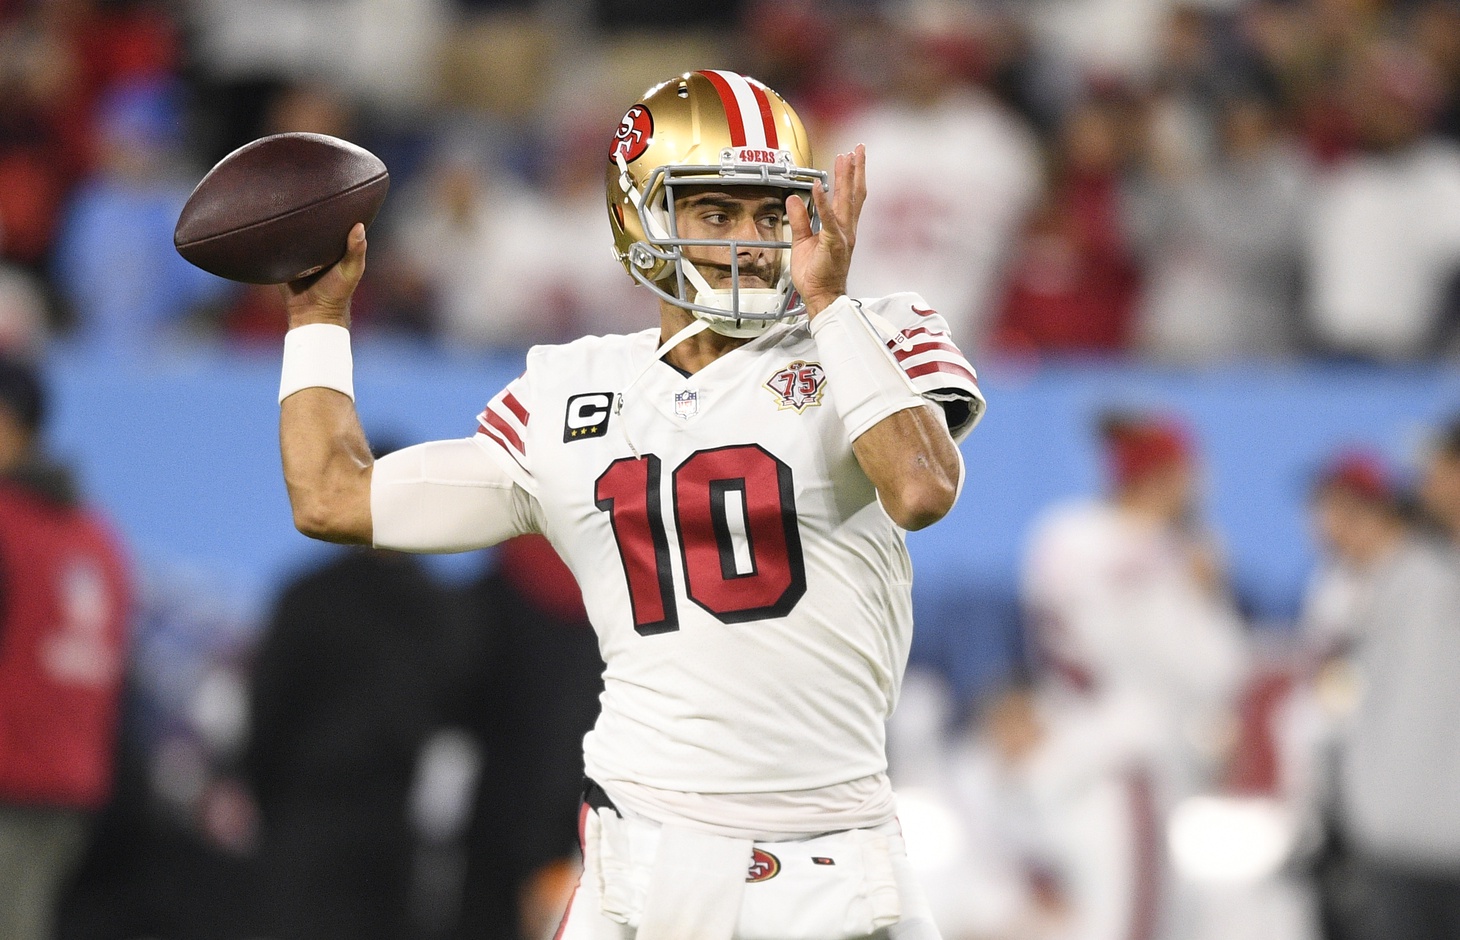 NFL trade candidates: How hot is the market for Jimmy Garoppolo